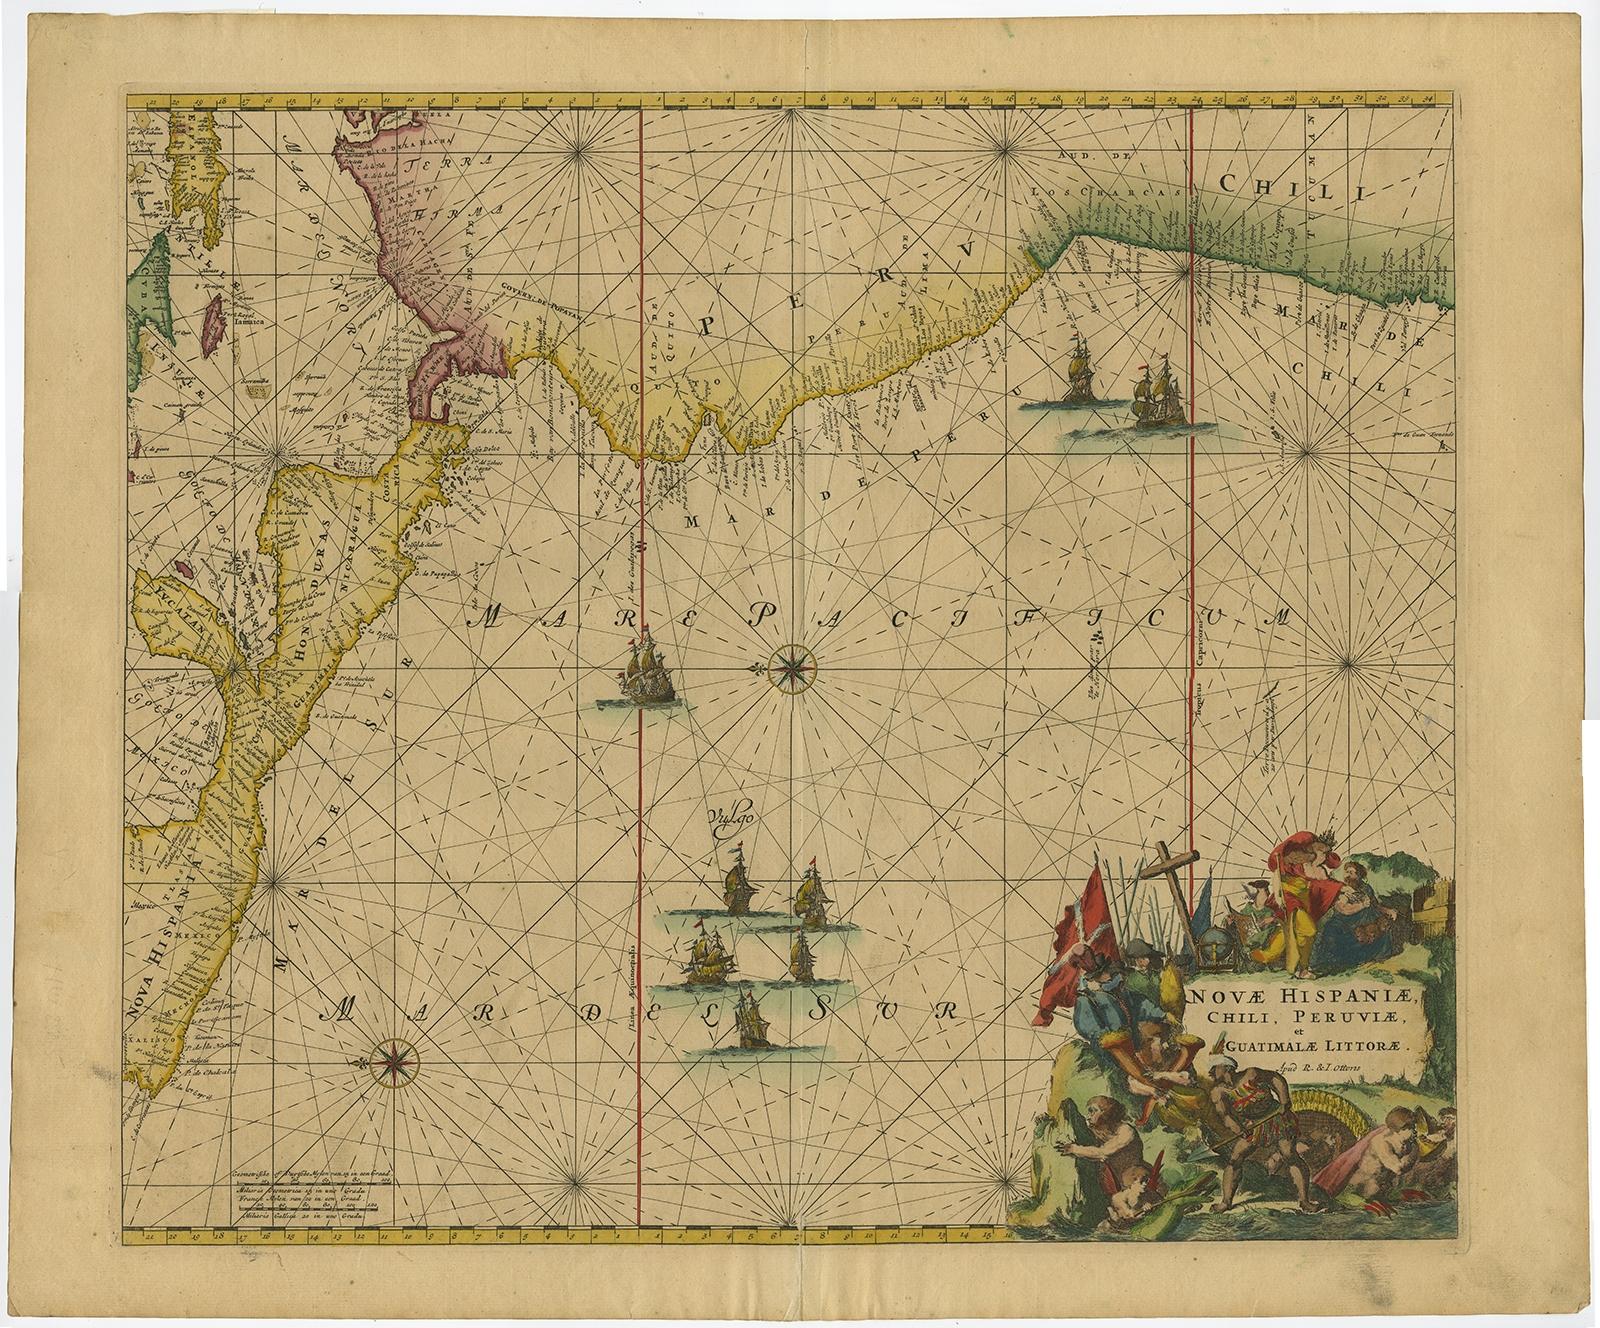 Antique map titled 'Novae Hispaniae, Chili, Peruviae et Guatamala Littorae.' 

Sea chart of Central America and the northwest coast of South America, oriented to the east, by Reinier & Joshua Ottens (after Frederick de Wit - 1675) in 1745 ('Atlas